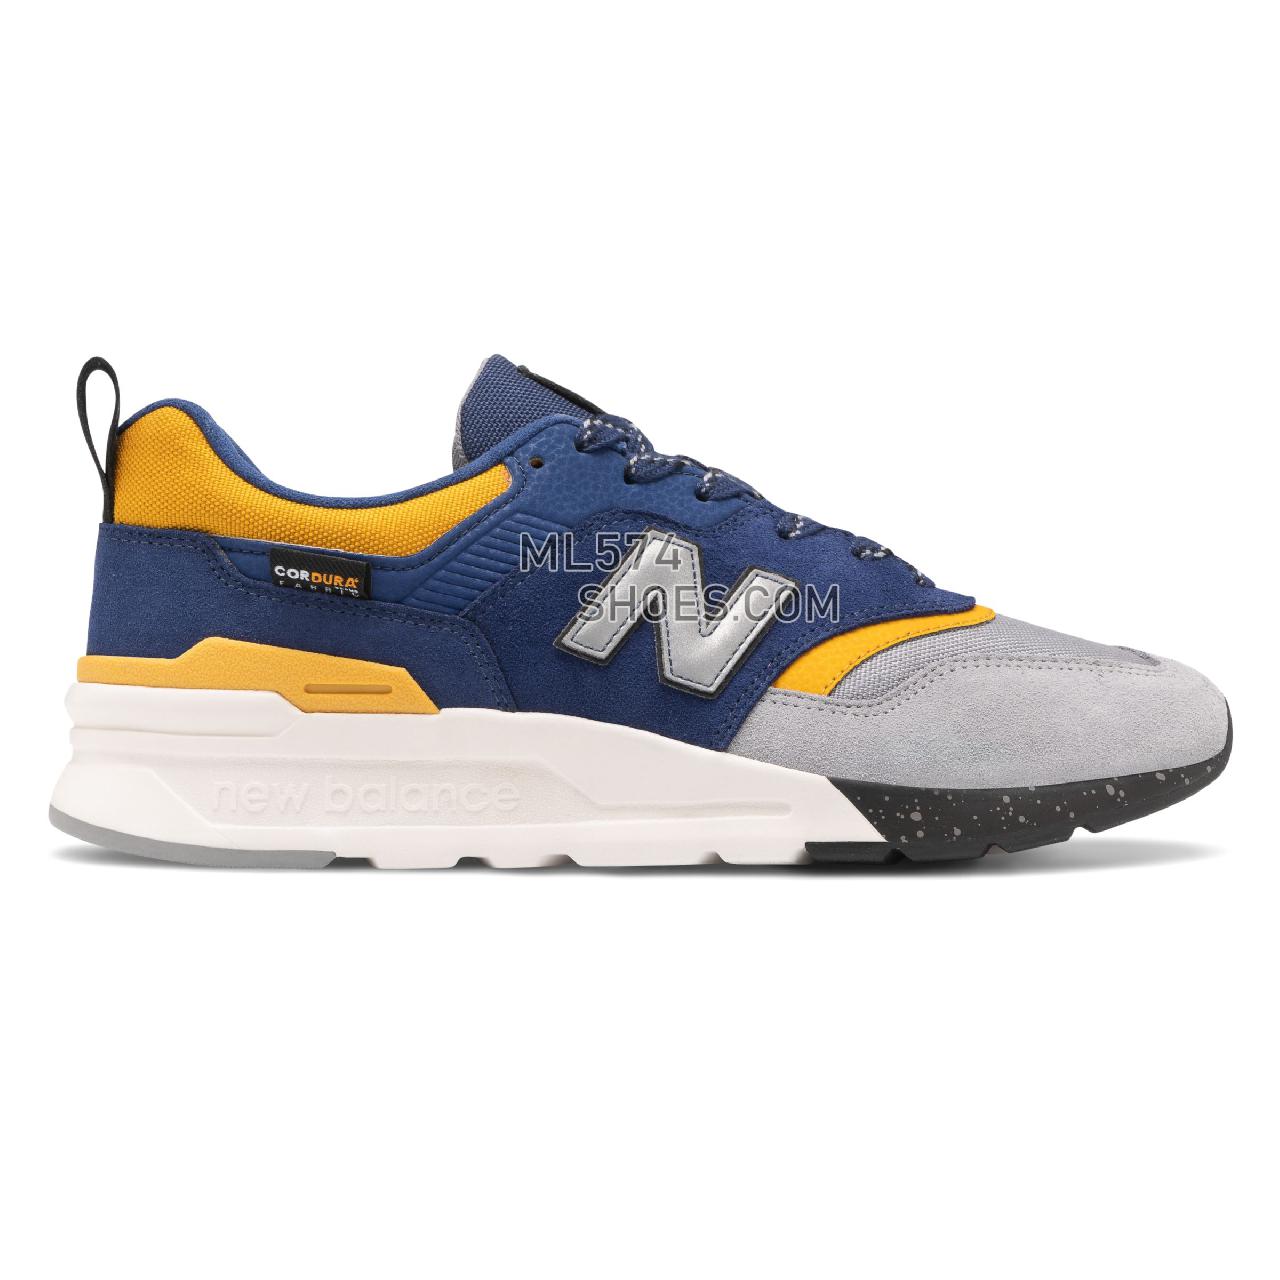 New Balance 997H - Men's Classic Sneakers - Techtonic Blue with Steel - CM997HYR